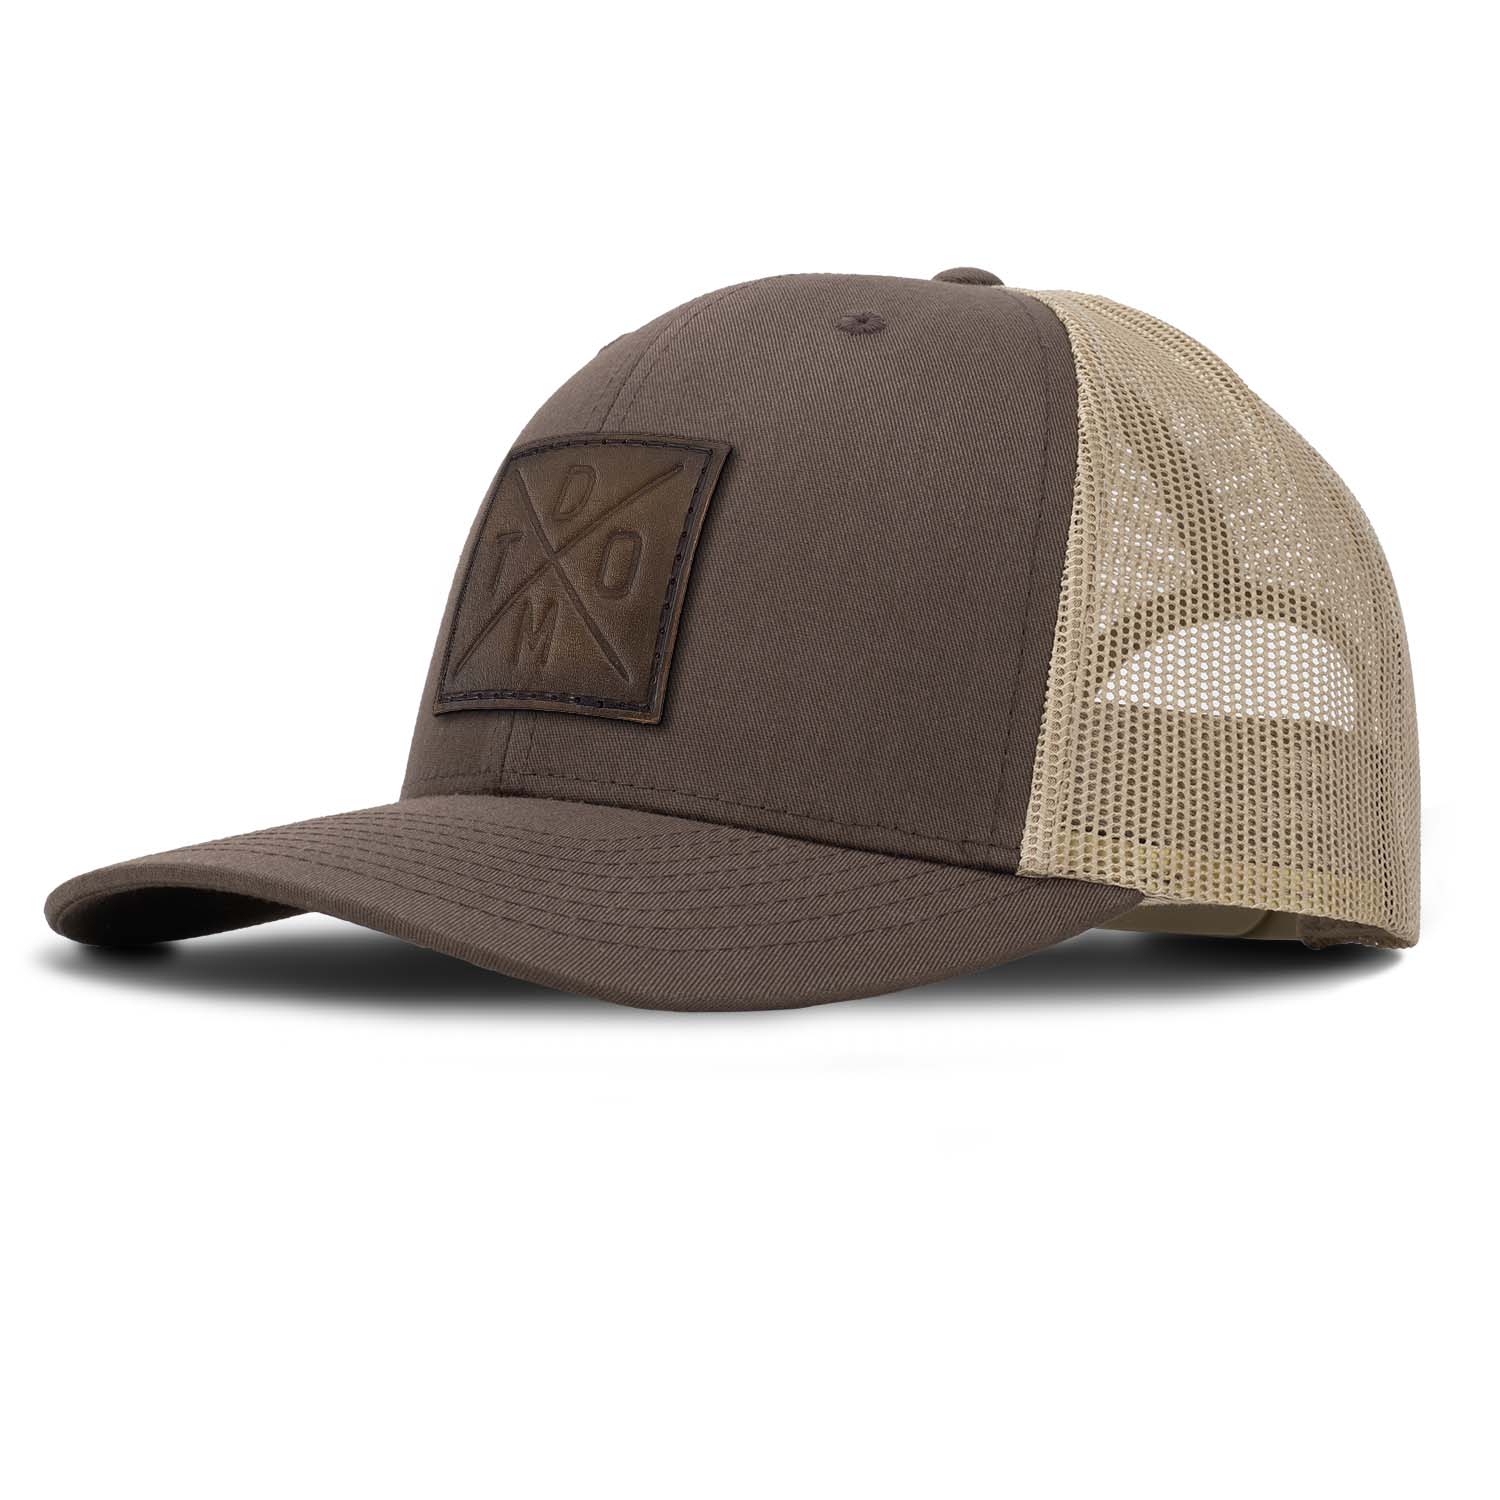 Revolution Mfg full grain leather debossed don't tread on me DTOM patch on a brown trucker hat with khaki mesh